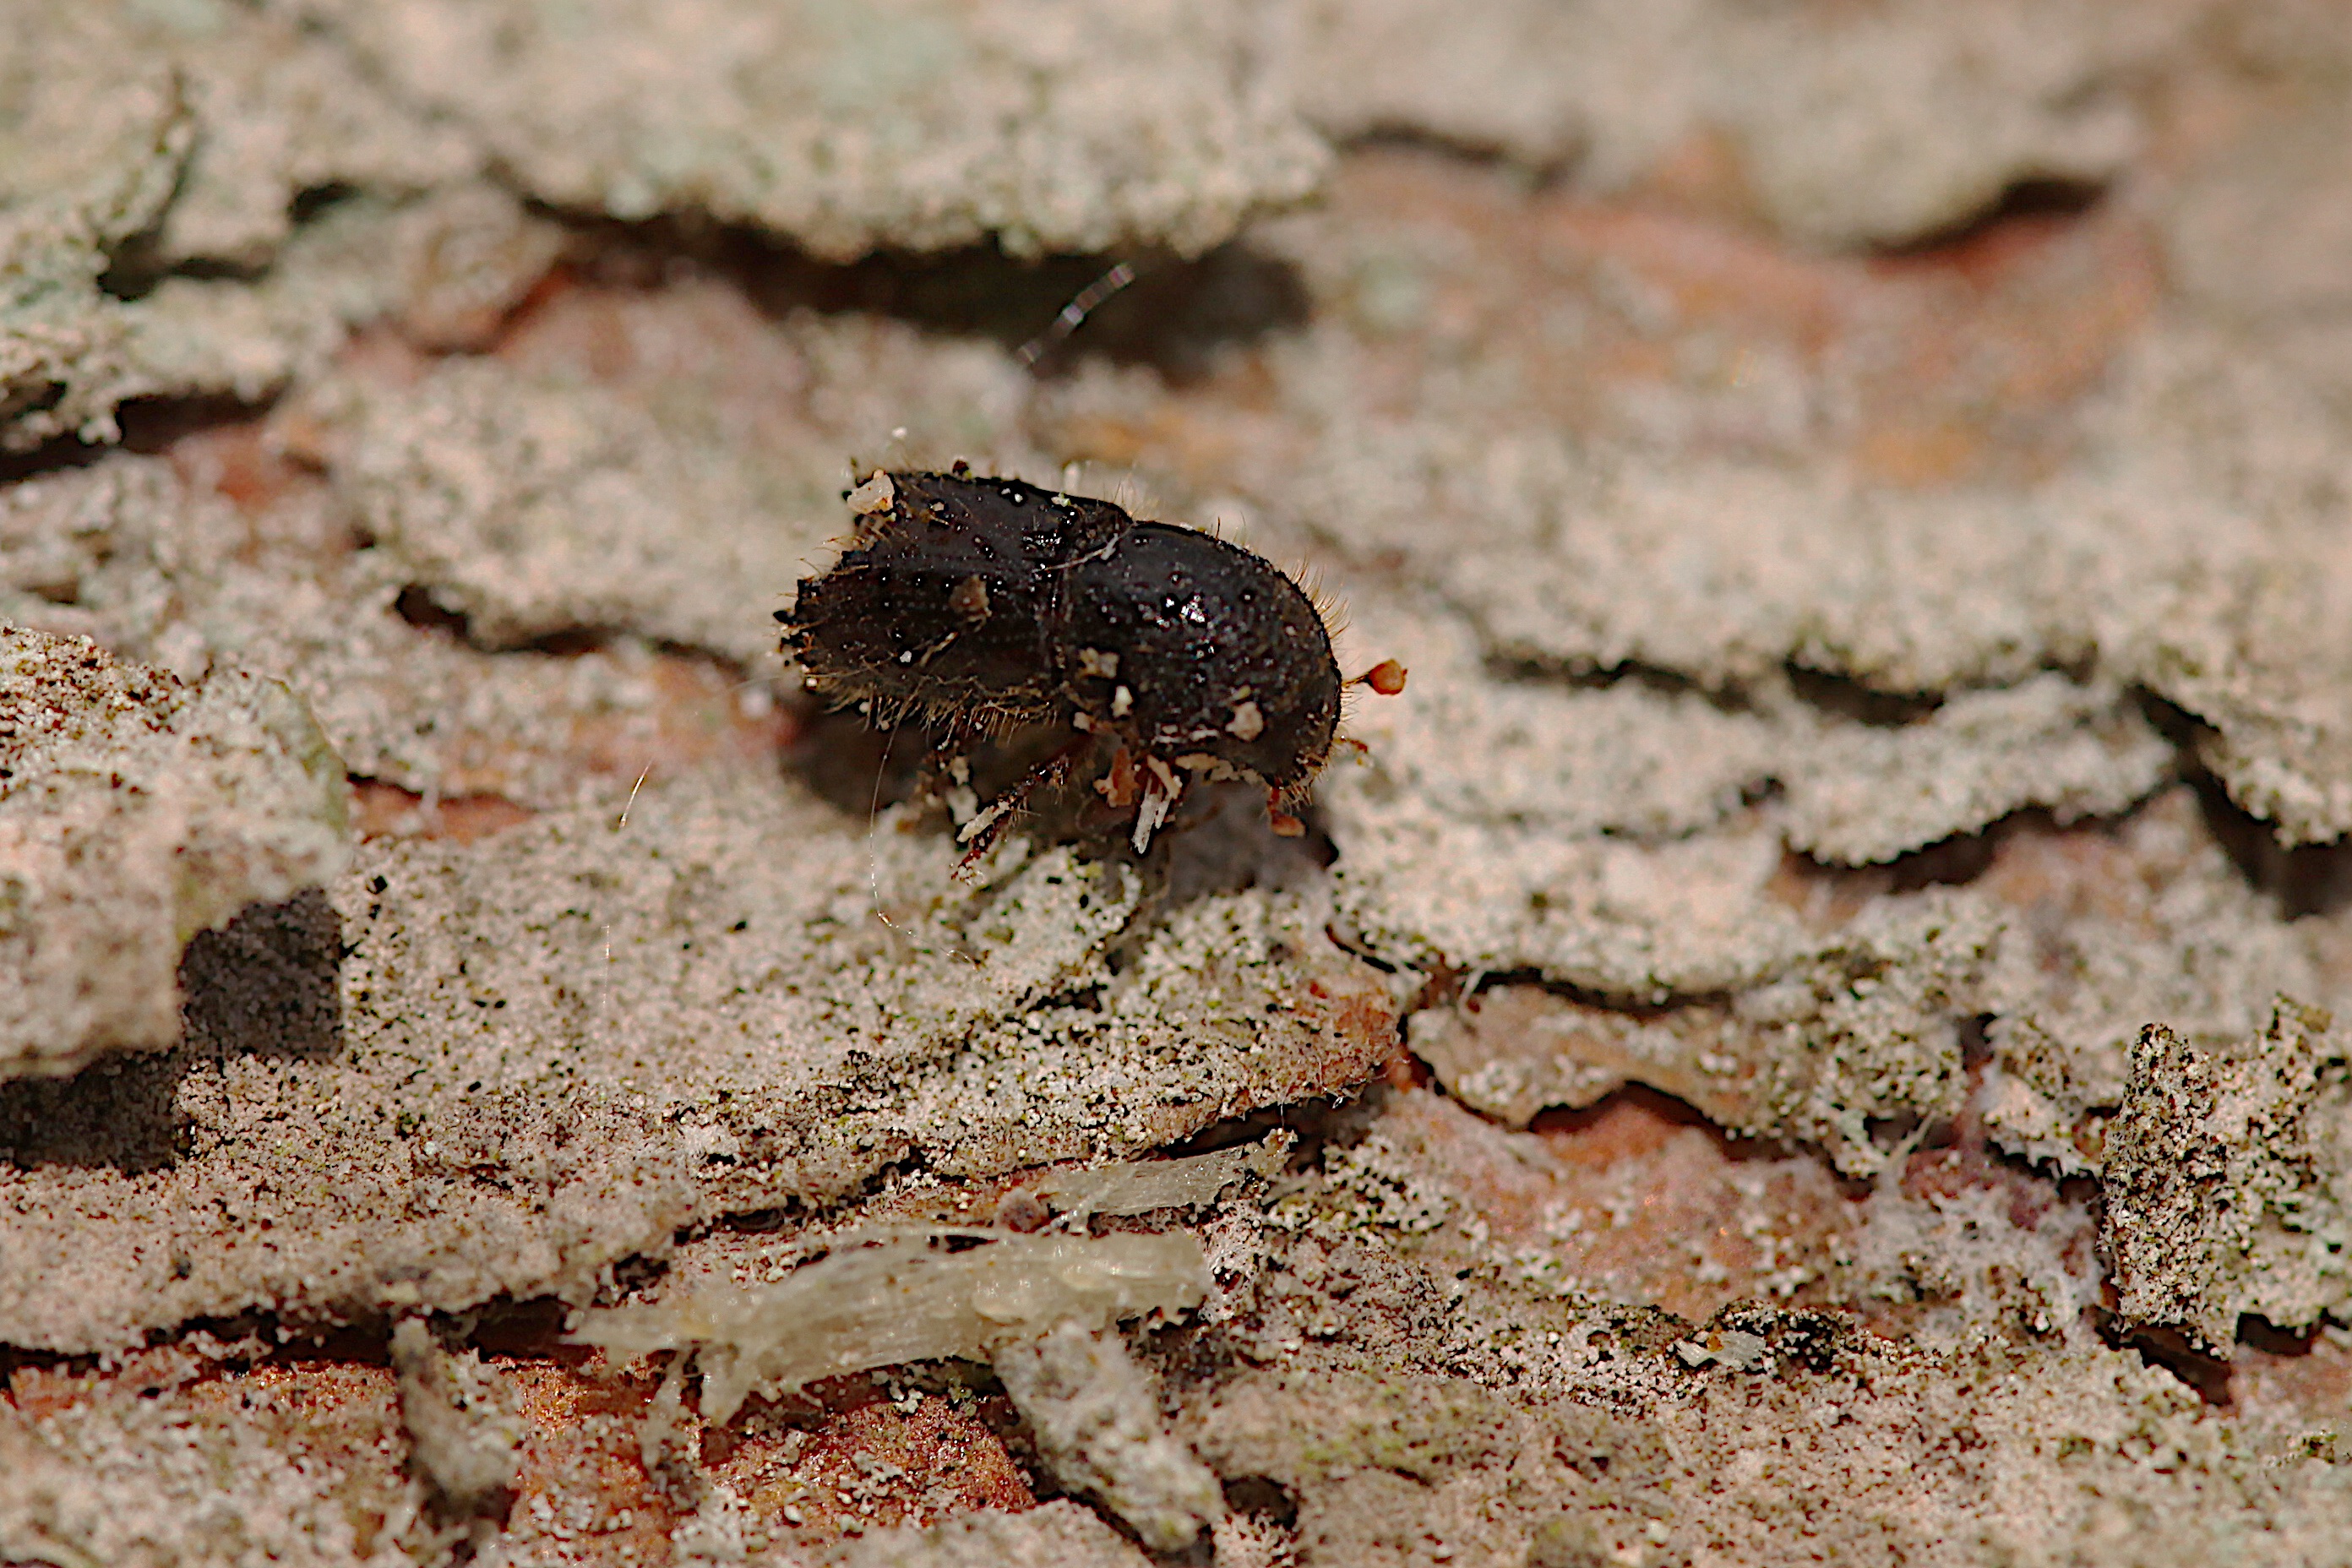 No breeding population of beetle found in wider environment